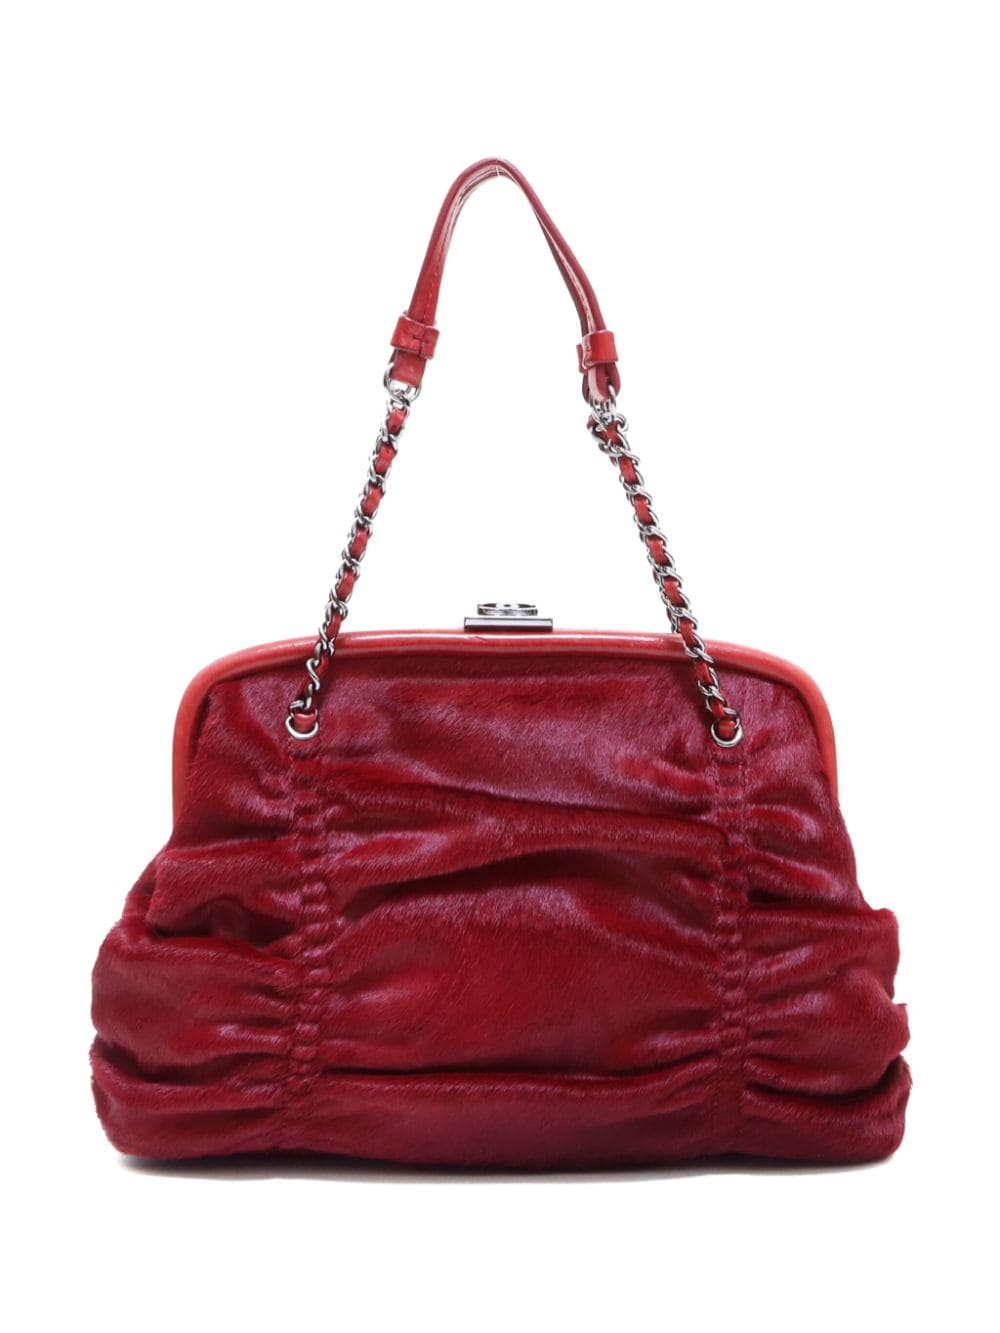 CHANEL Pre-Owned 2006-2008 pre-owned Schultertasche mit Kalbshaar - Rot von CHANEL Pre-Owned